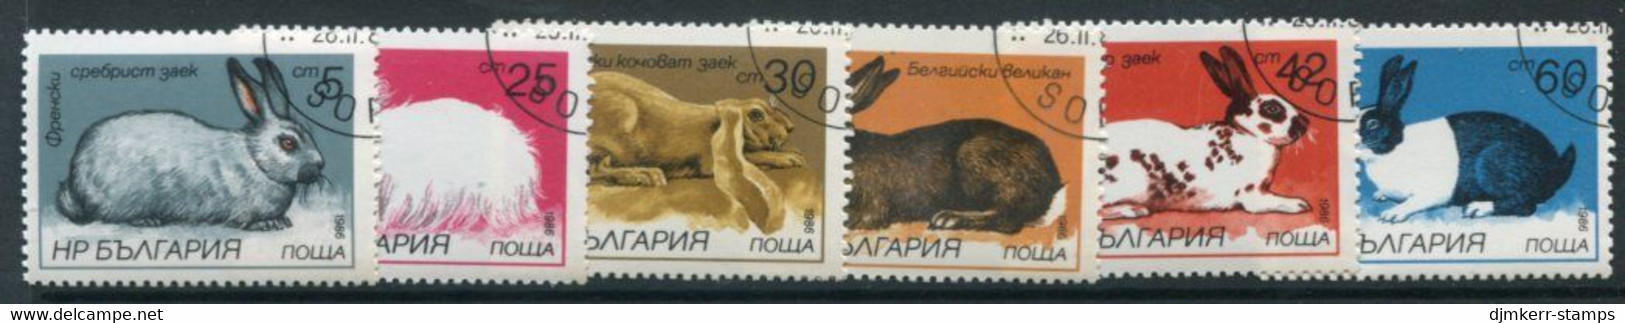 BULGARIA 1986 Rabbits Perforated  Used.  Michel 3447-52A - Usati